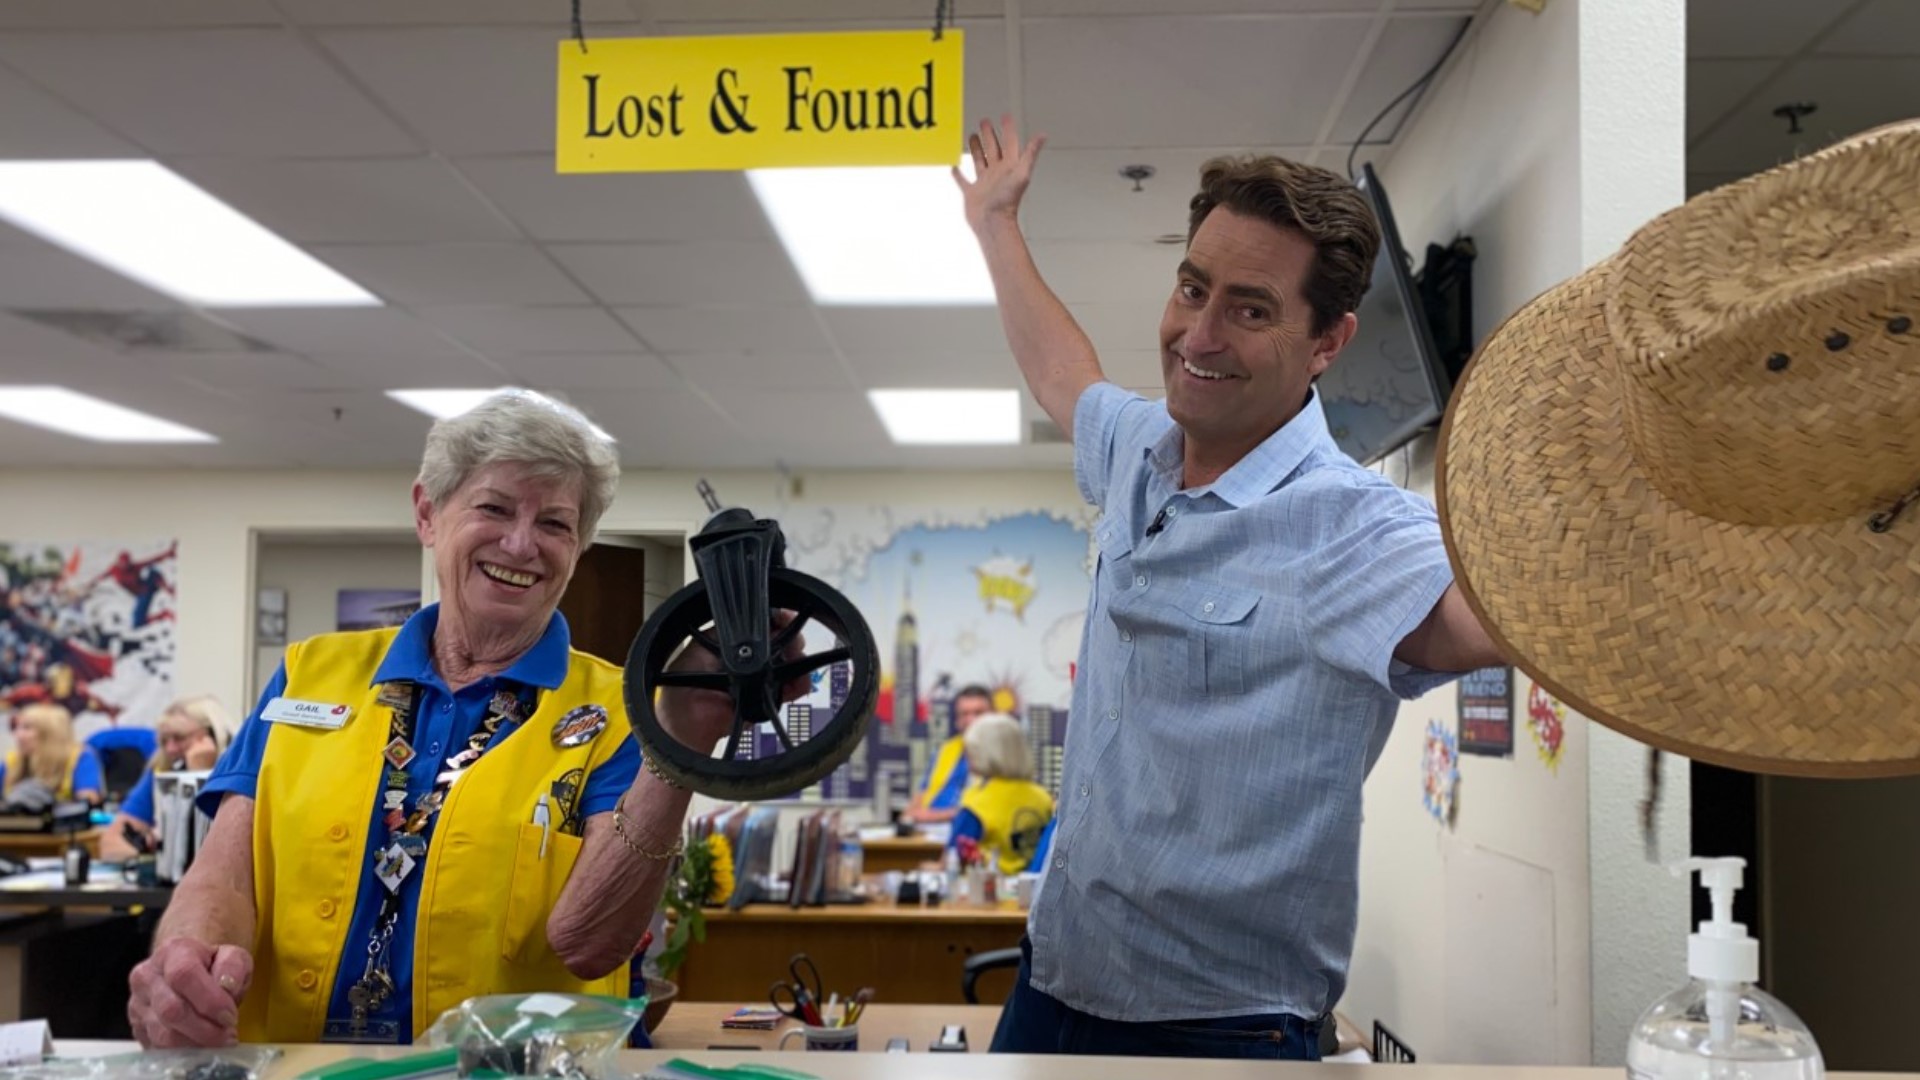 1960 Hoover Grad's Lost Purse Found, Family Finds Treasures Inside -  News-Talk 1480 WHBC